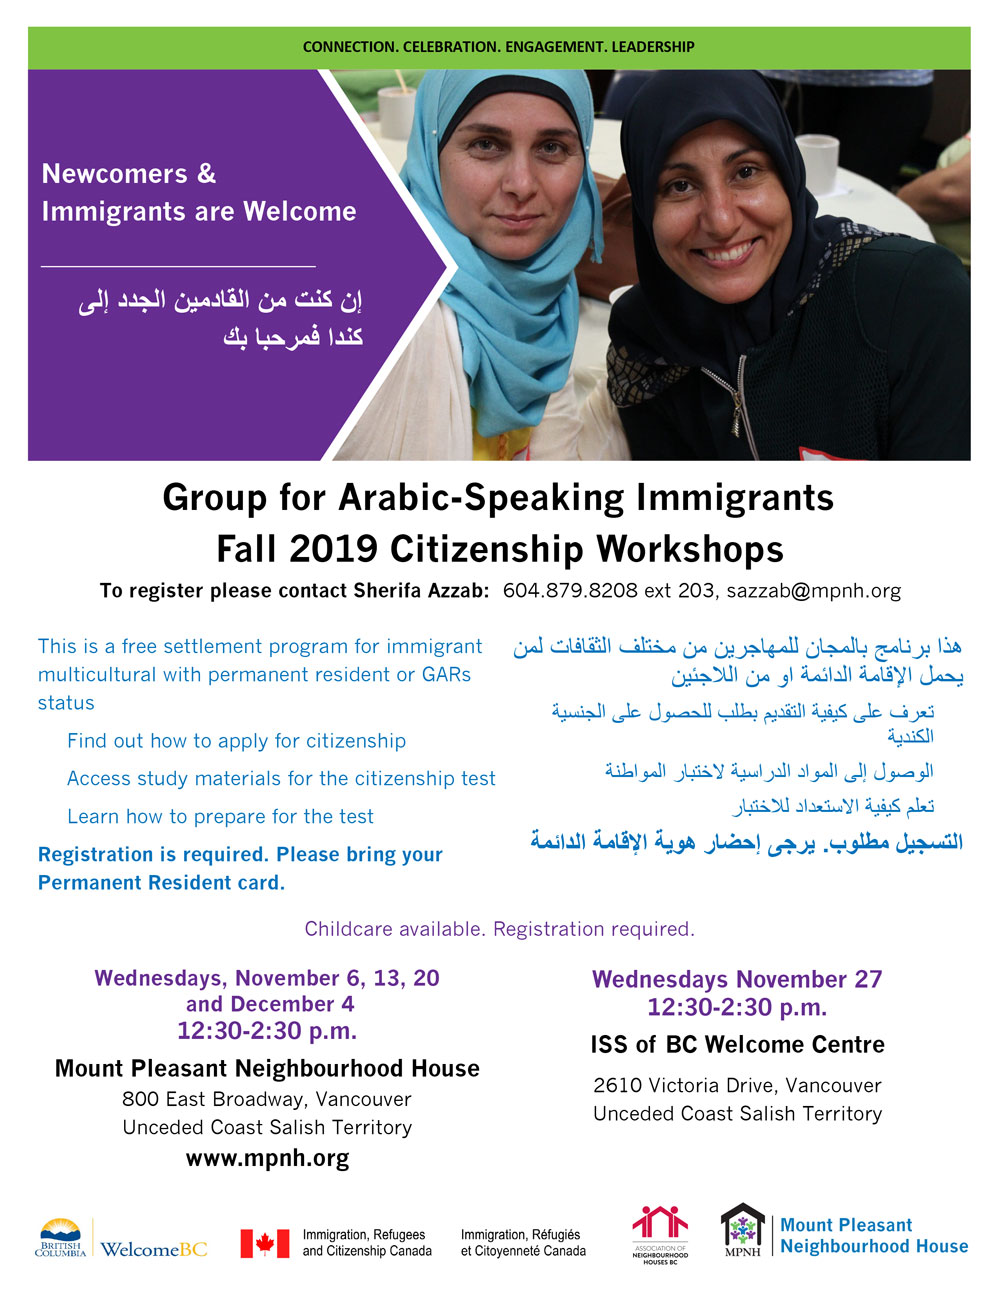 An image of the poster with workshop details, featuring a photo of two Arabic-speaking friends smiling for a photo